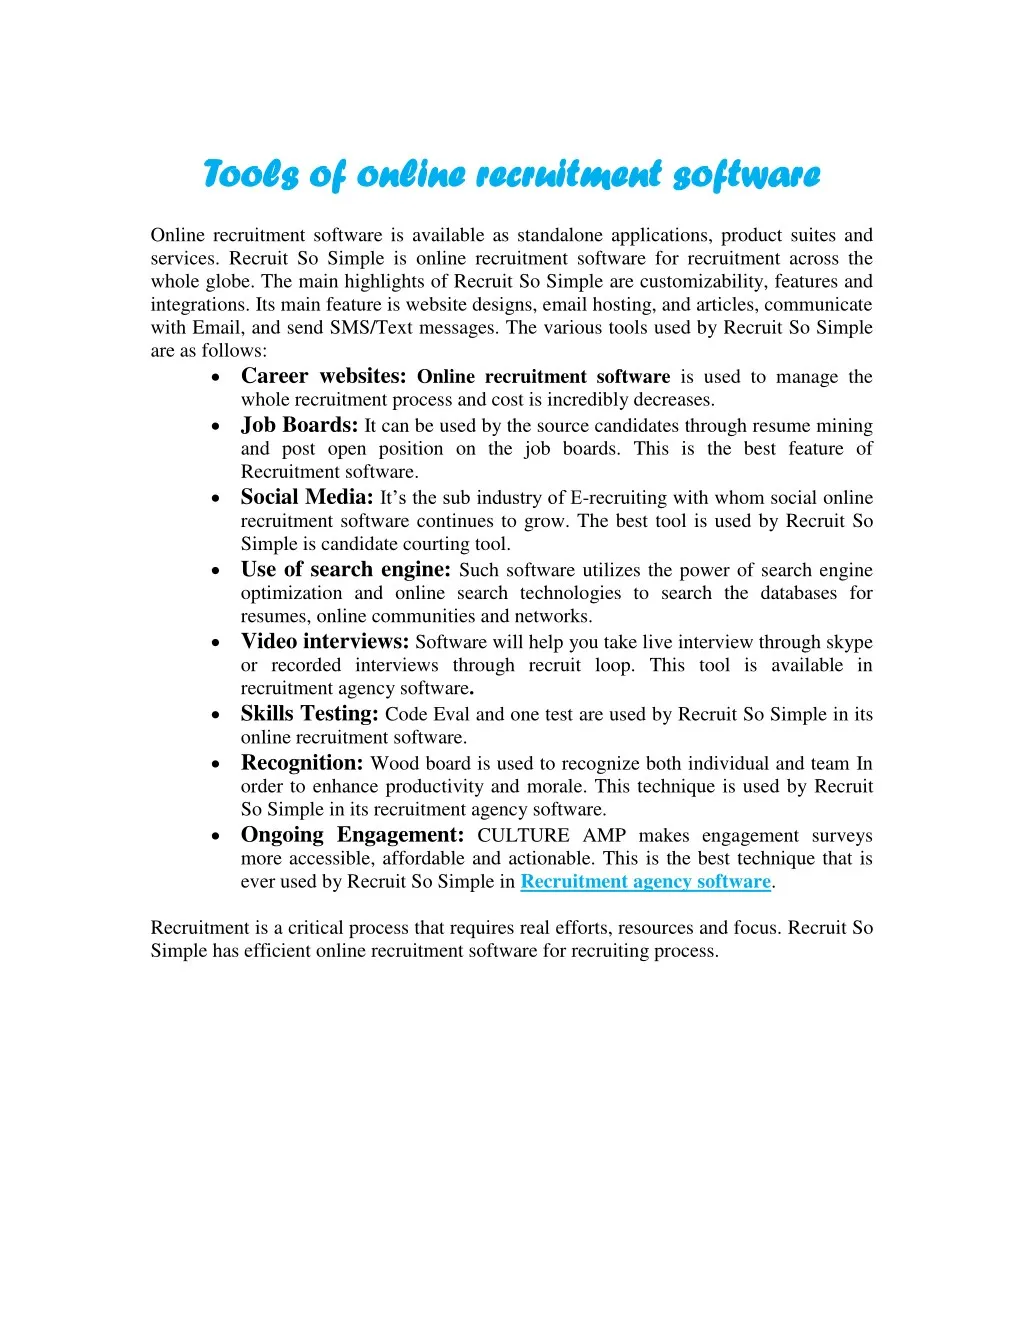 tools of tools of online recruitment software